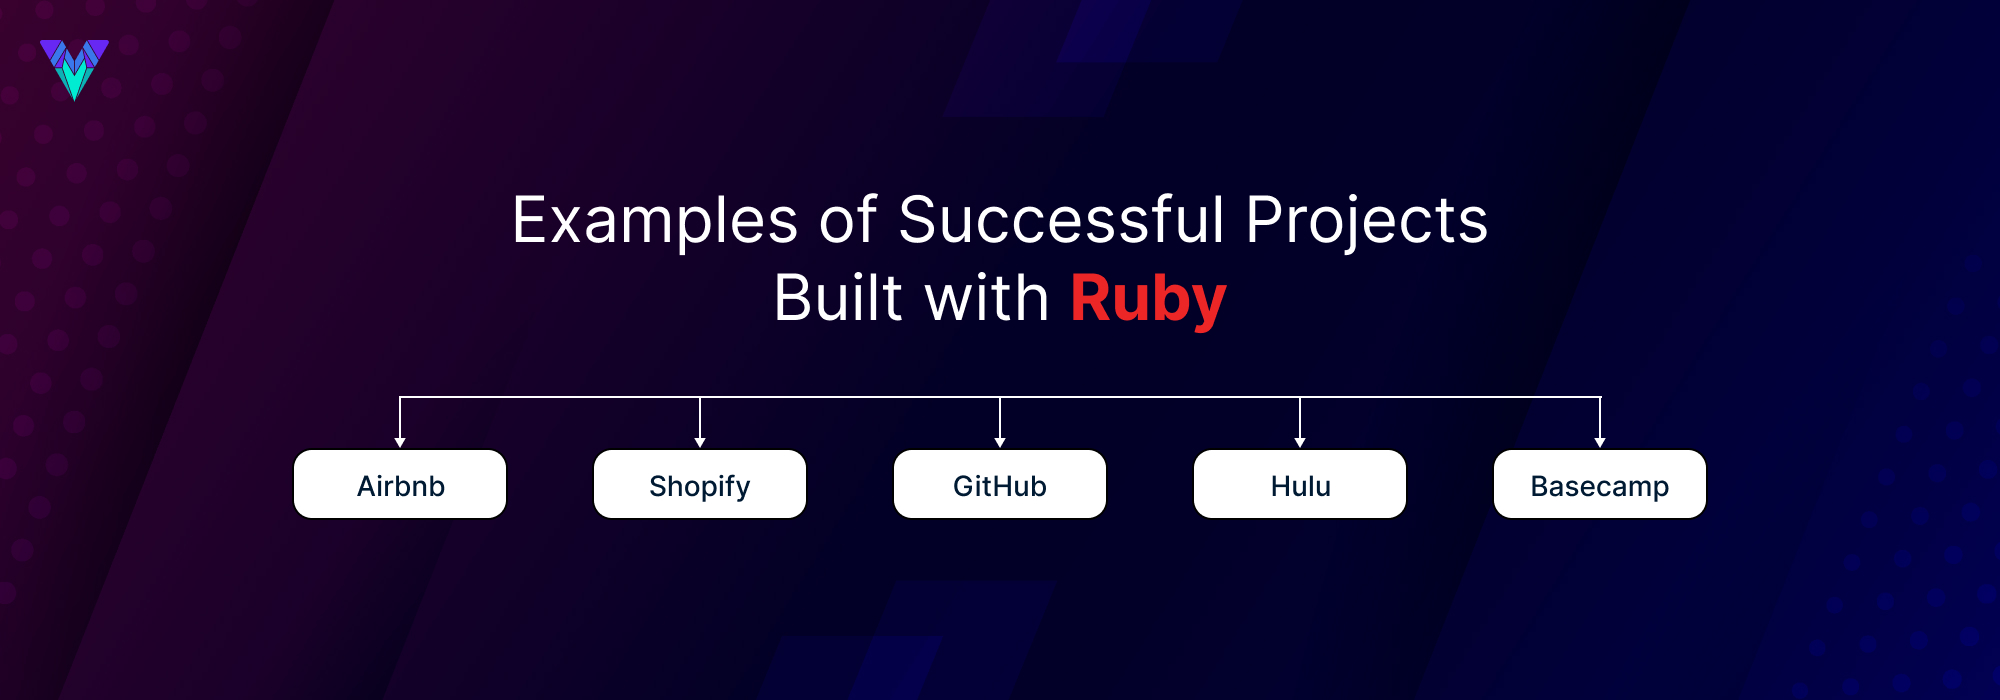 Examples Of Successful Projects Built With Ruby On Rails